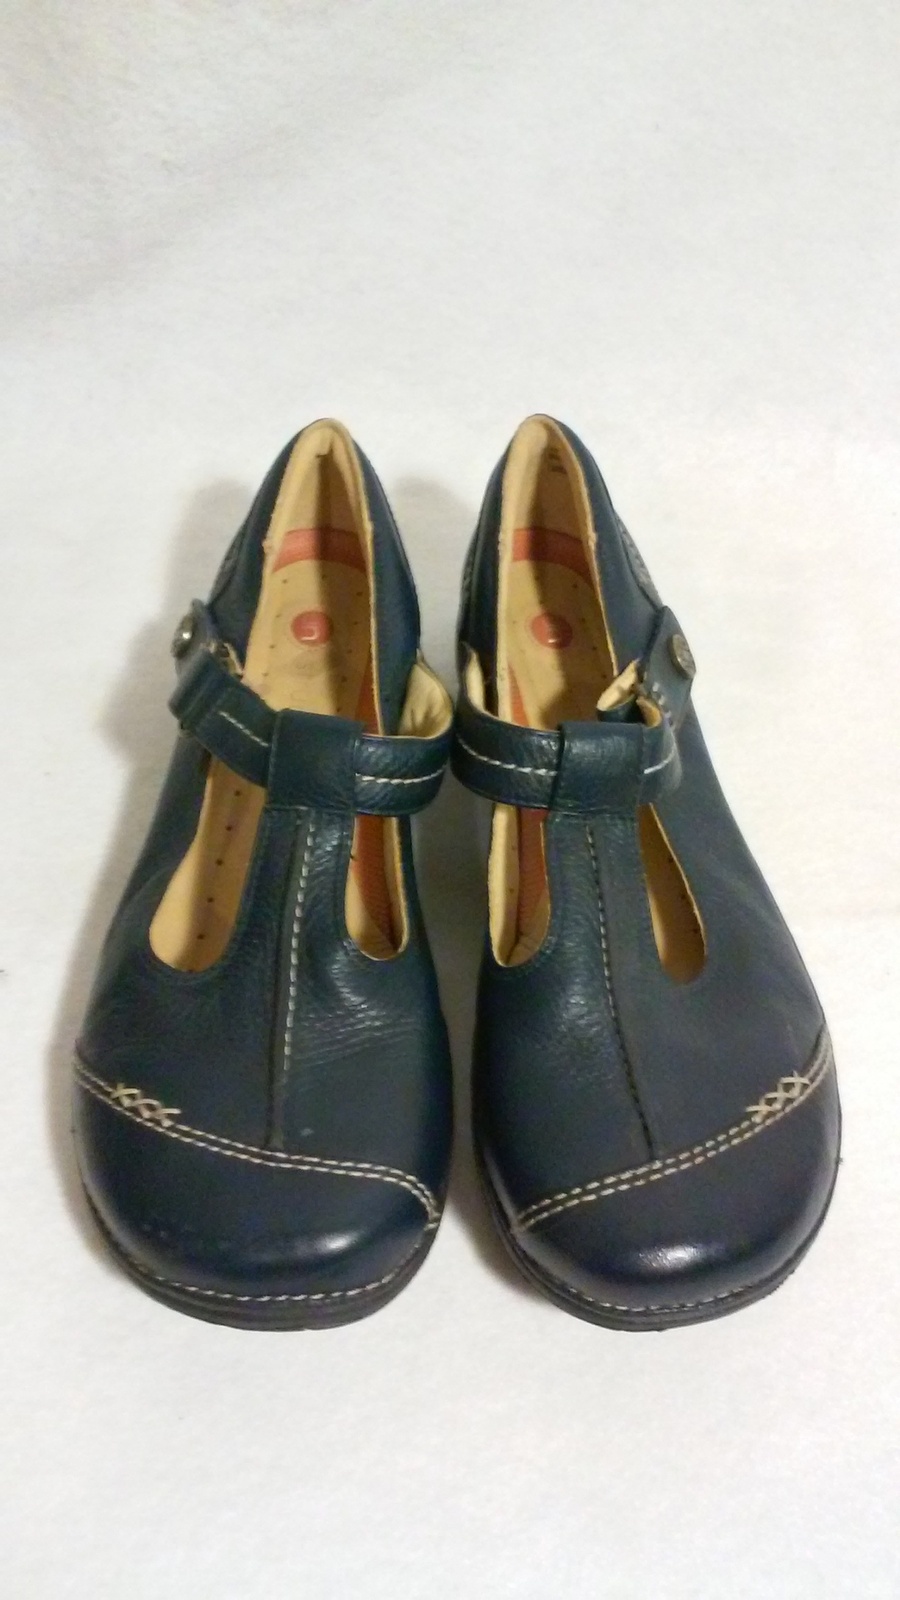 Clarks Blue Leather Mary Jane Shoes, Size 11W - Flats & Oxfords